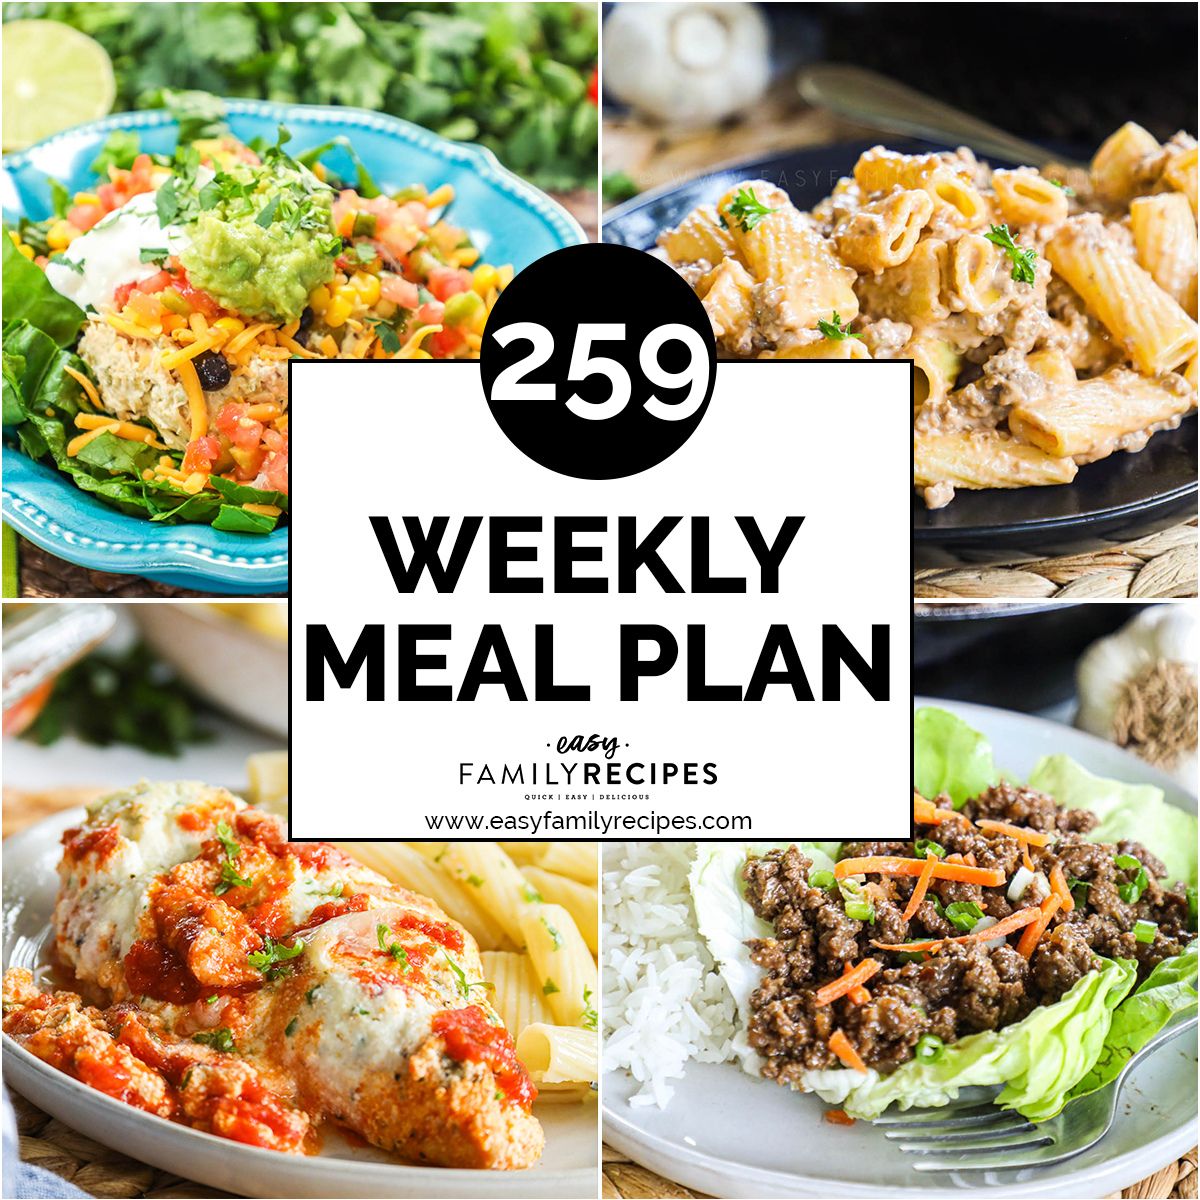 4 plated dinners for free meal plan #259